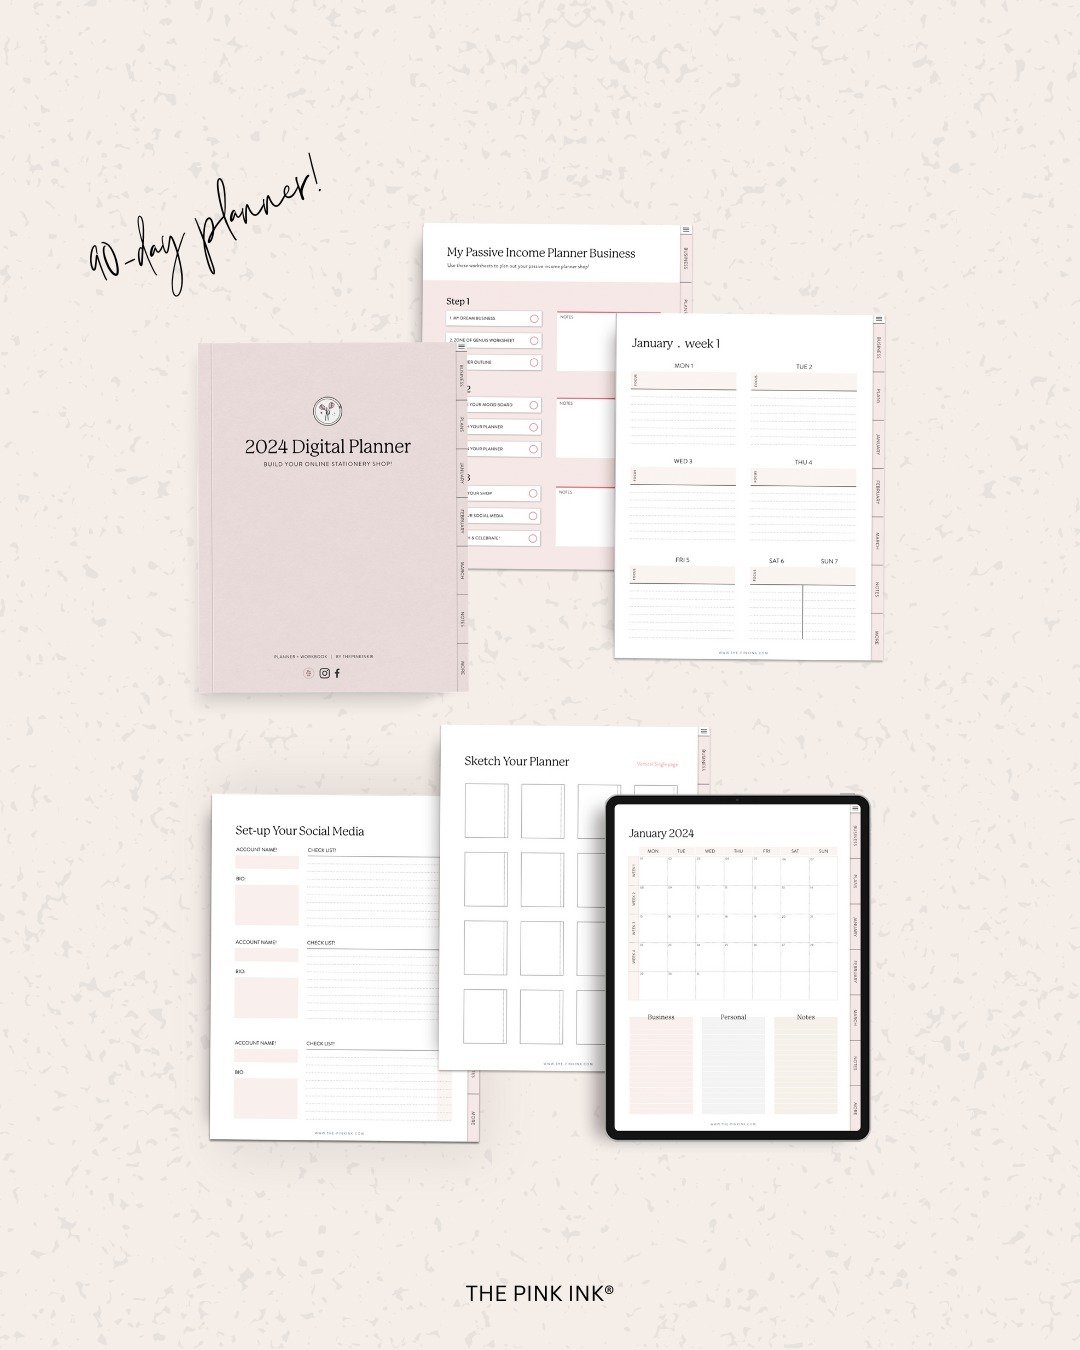 Unsure where to begin or how to stay focused on your goals? 🙃⁠
⁠
My 2024 Digital Planner for Creatives has got you covered! ✨ ⁠
⁠
From defining your niche to crafting your vision and taking strategic action, this planner and workbook combo provides 